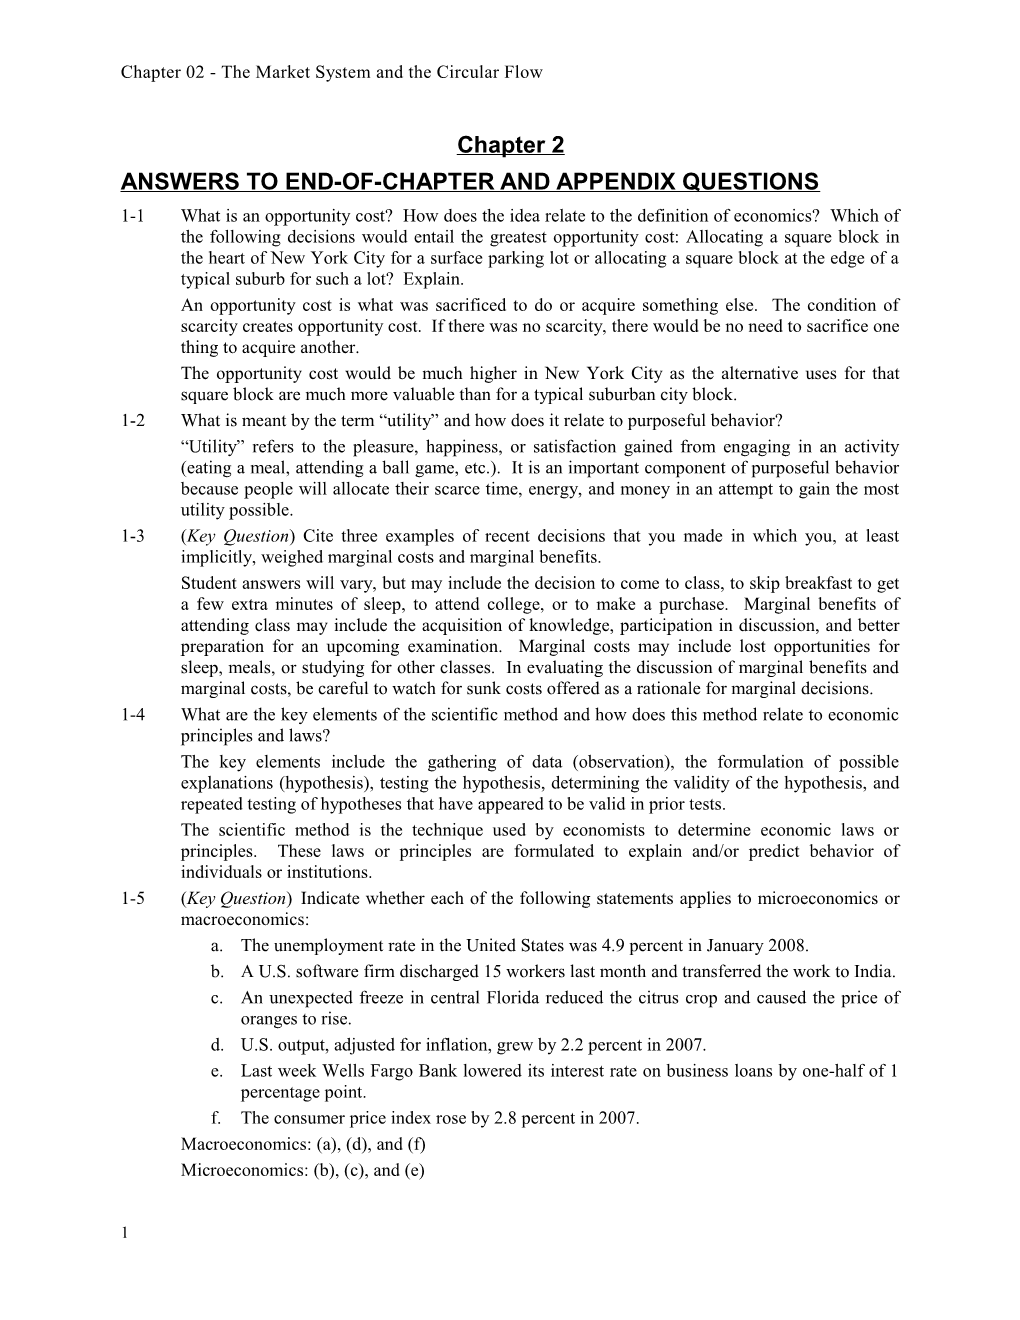 Answers to End-Of-Chapter and Appendix Questions